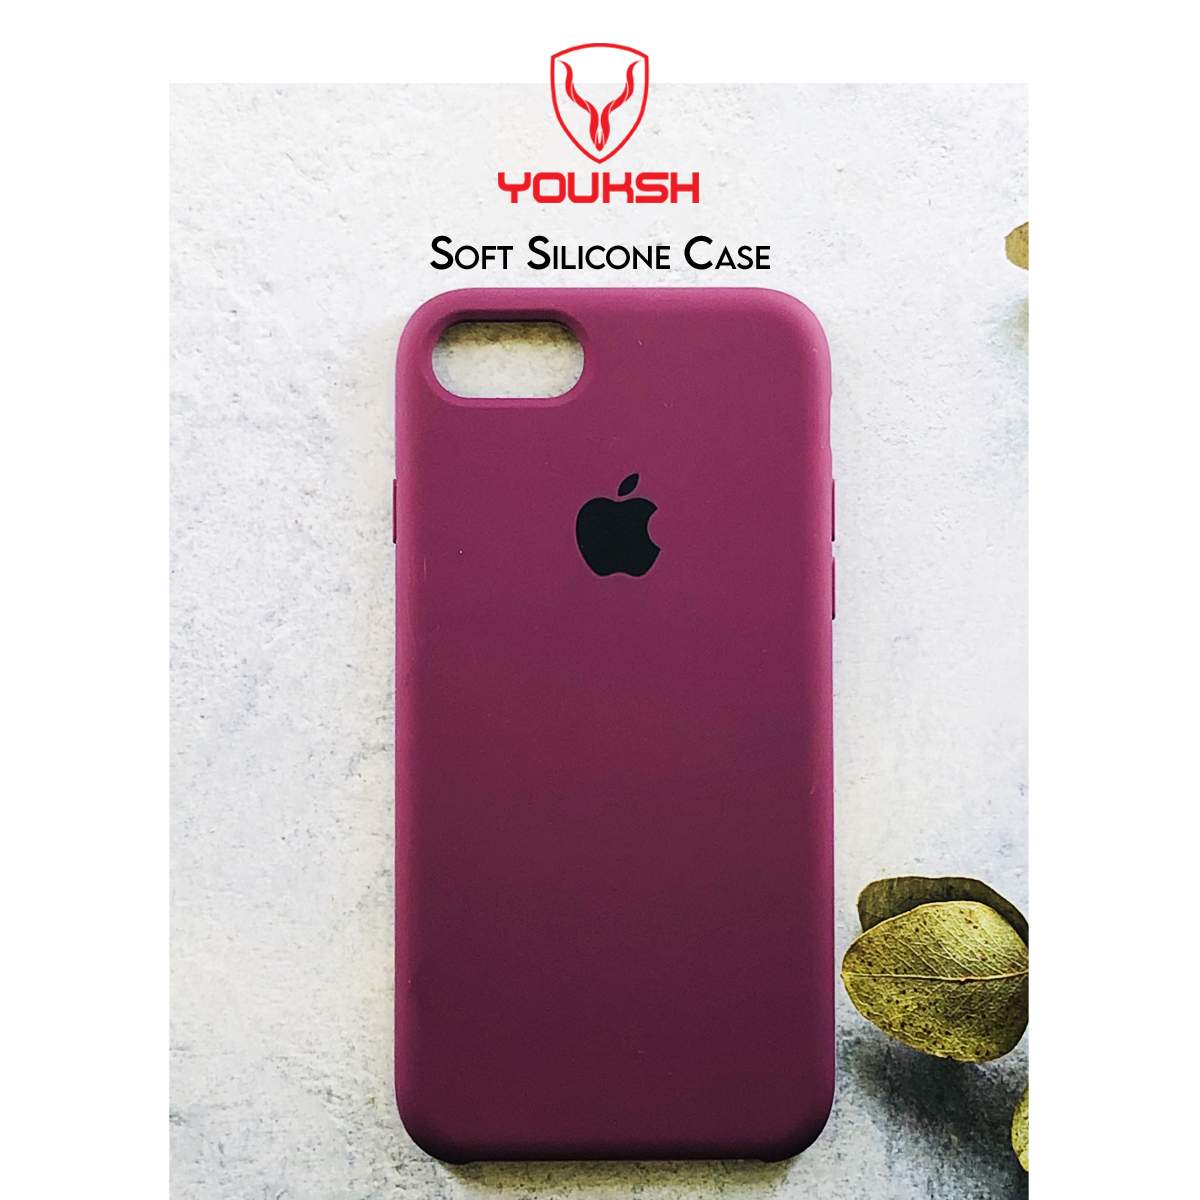 Apple iPhone 7/8 - Youksh Premium Ultra Slim Shockproof Liquid Silky Silicone Soft Rubber Comfortable Protective Case.